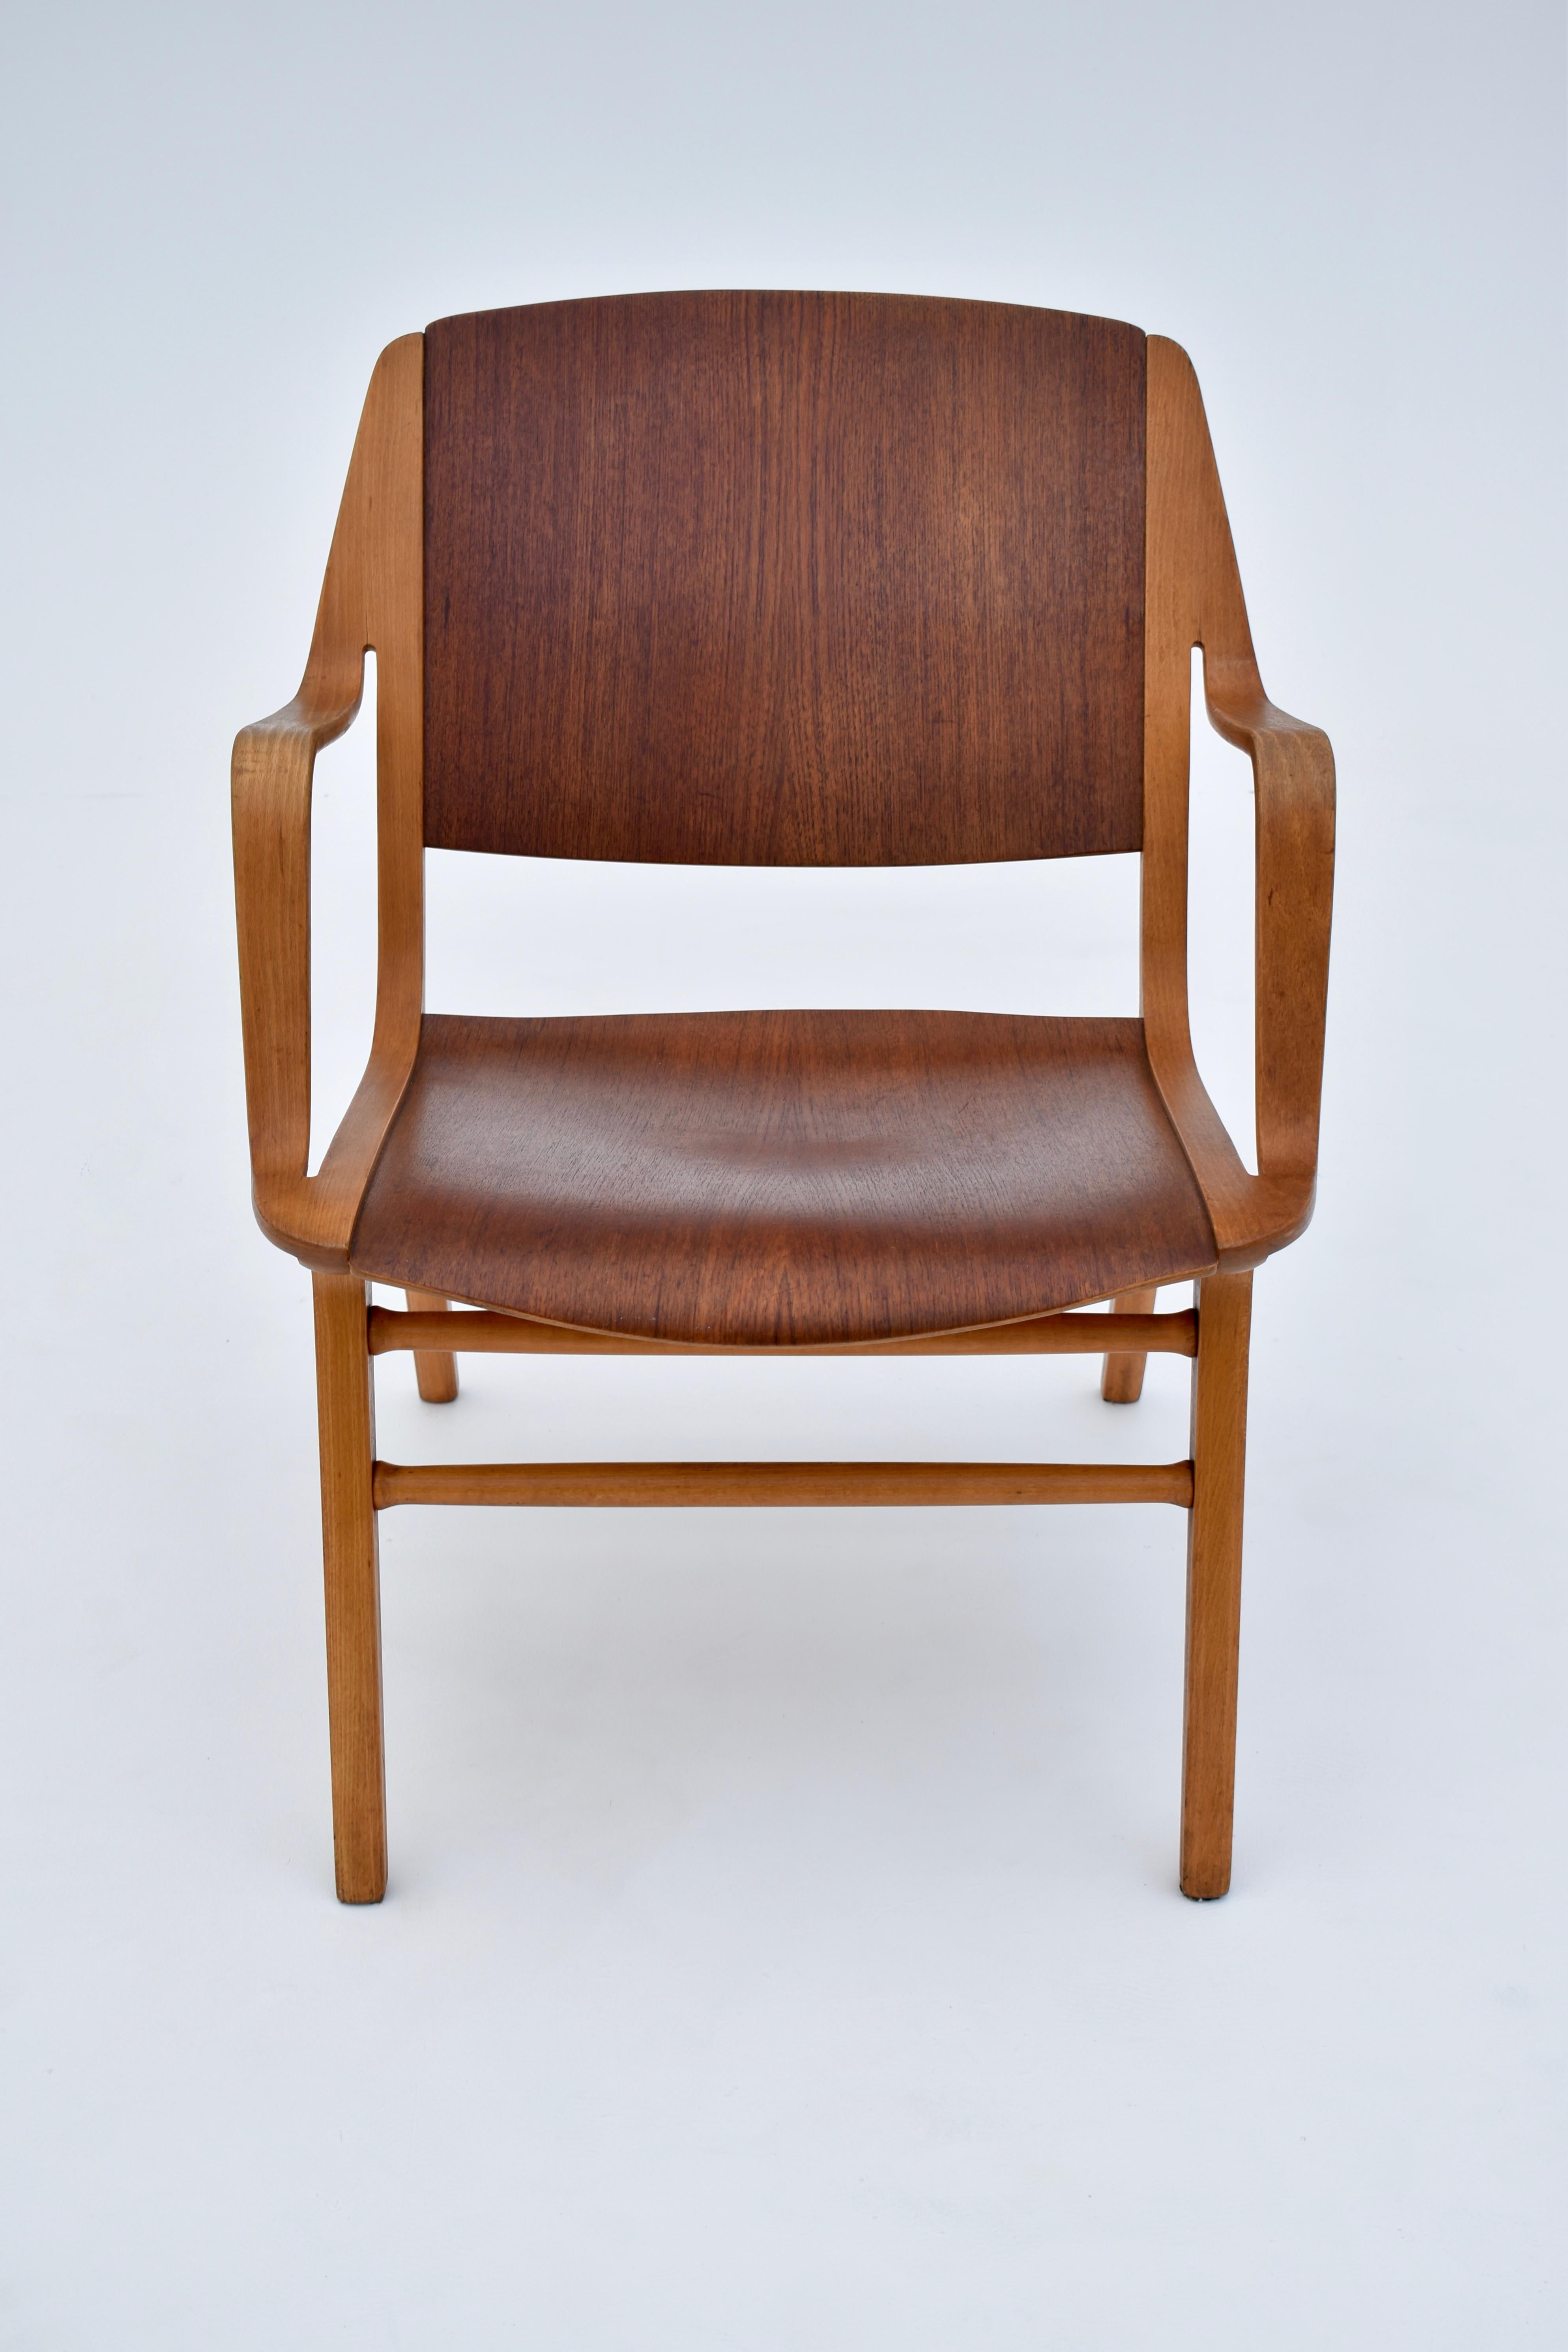 A favourite of ours and certainly a favourite or architects who liked to dress their projects with these chairs for photo shoots in the 1950s and 1960s.

A design Classic from 1947 this design used revolutionary production techniques to achieve a